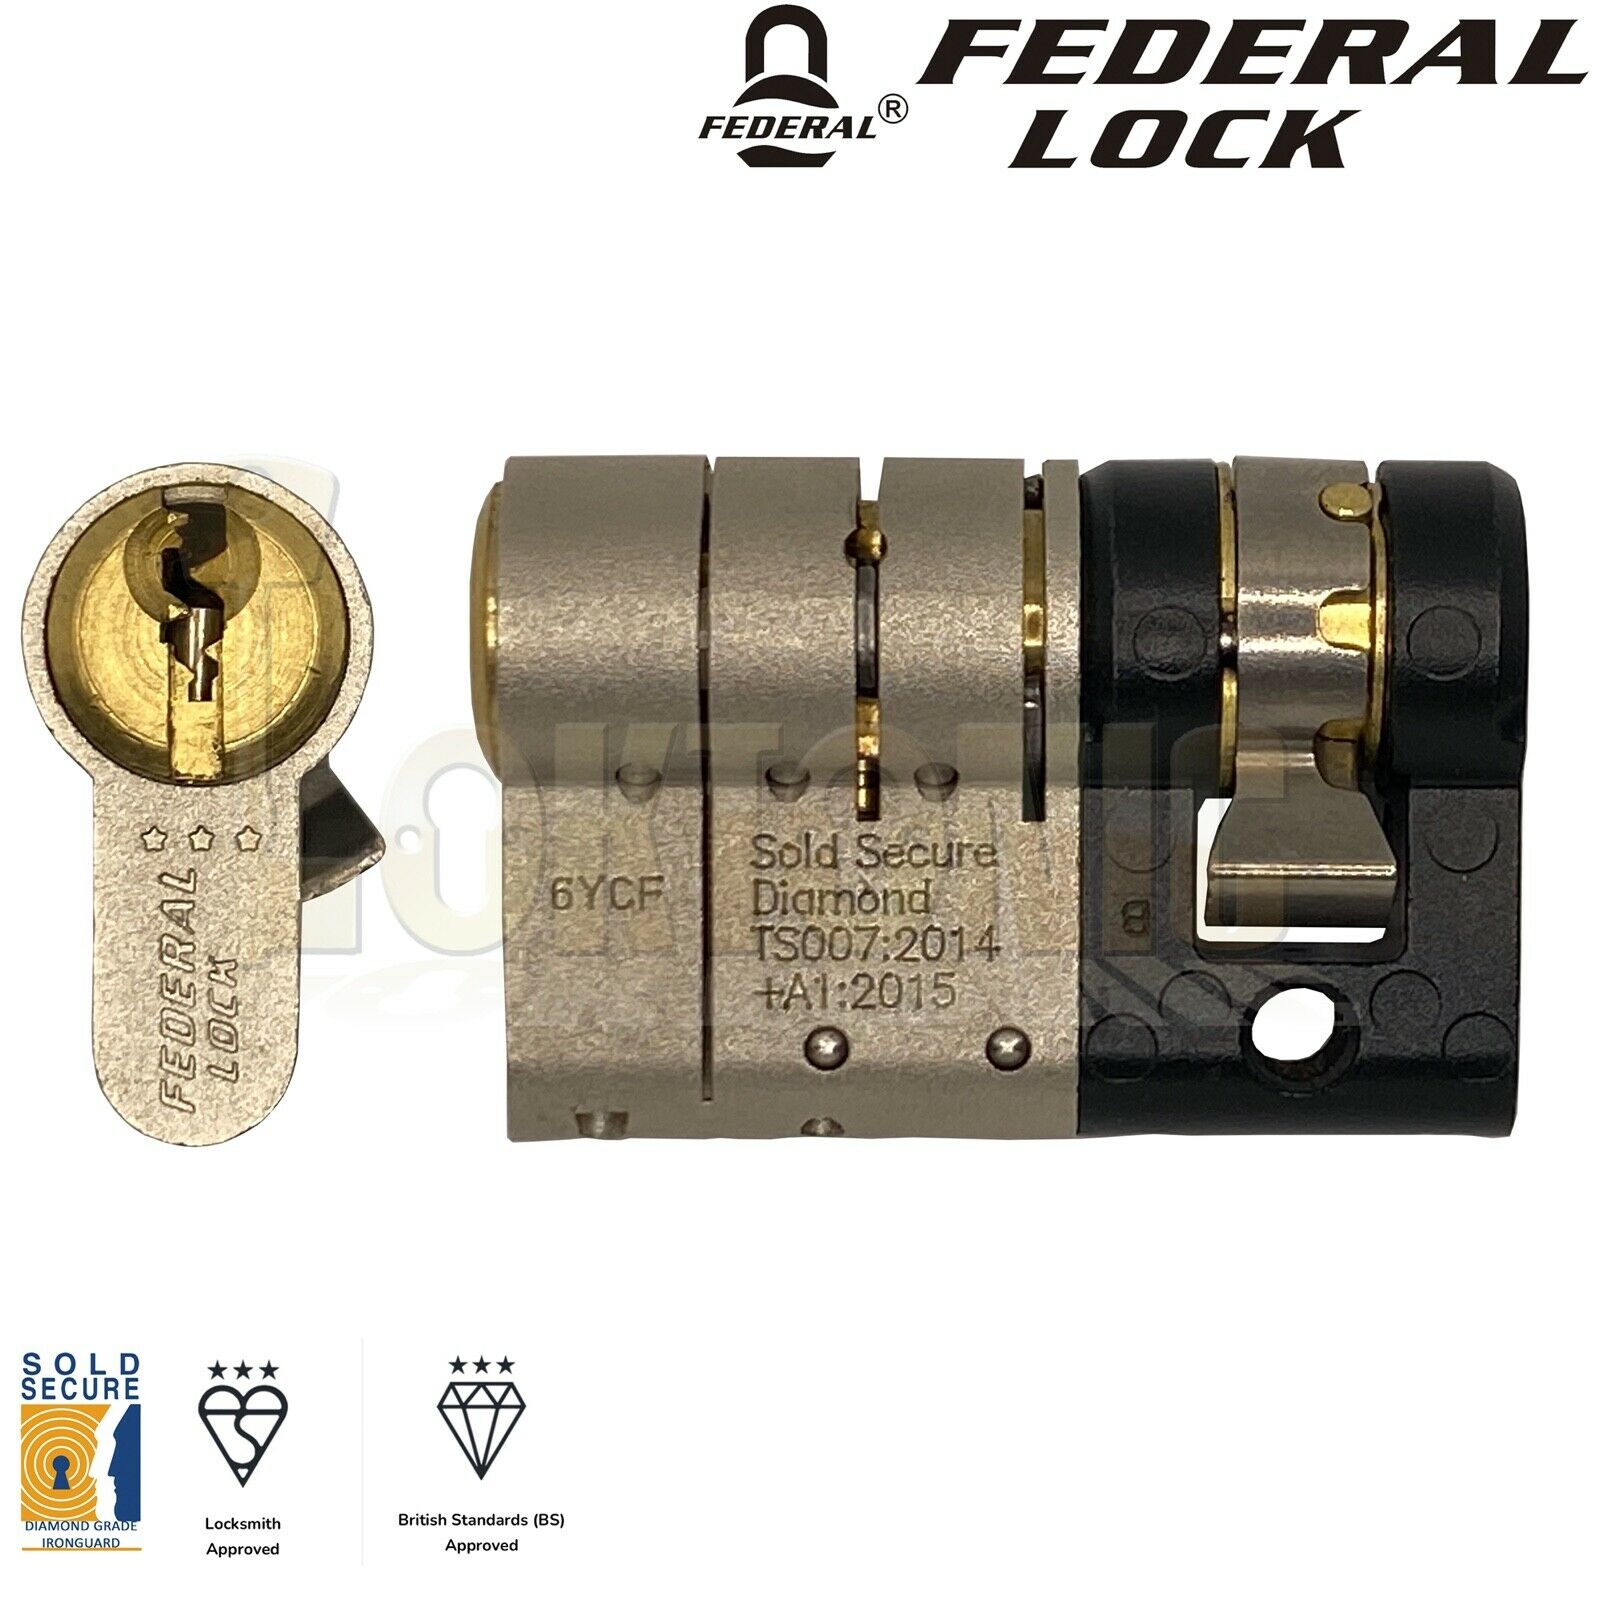 Federal Security Composite 35-35 Euro Cylinder uPVC Door Lock 3 Star Sold Secure 